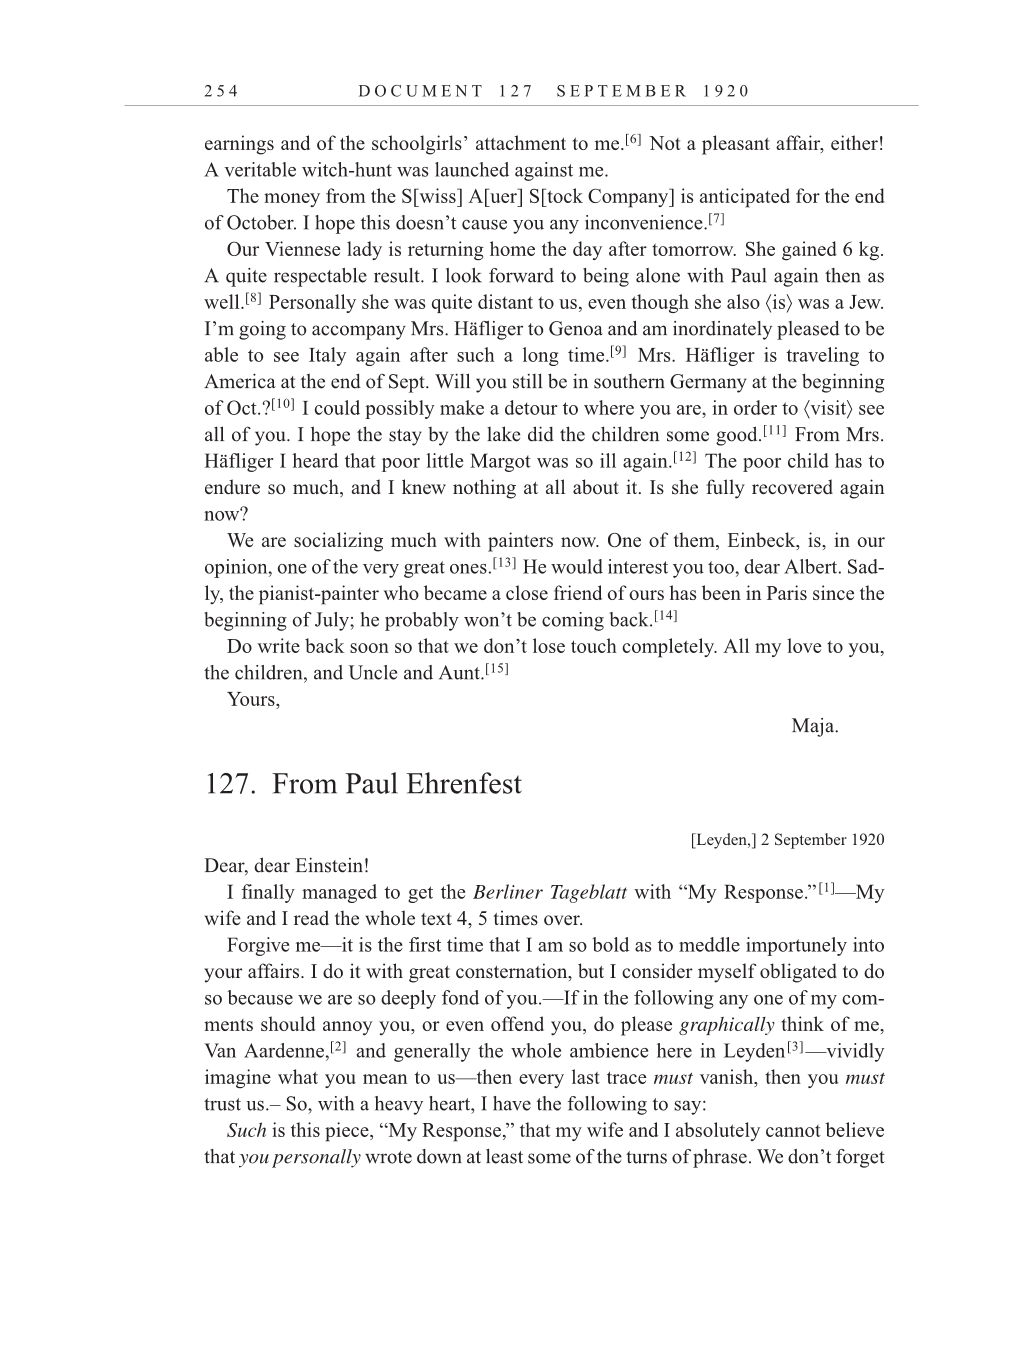 Volume 10: The Berlin Years: Correspondence, May-December 1920, and Supplementary Correspondence, 1909-1920 (English translation supplement) page 254